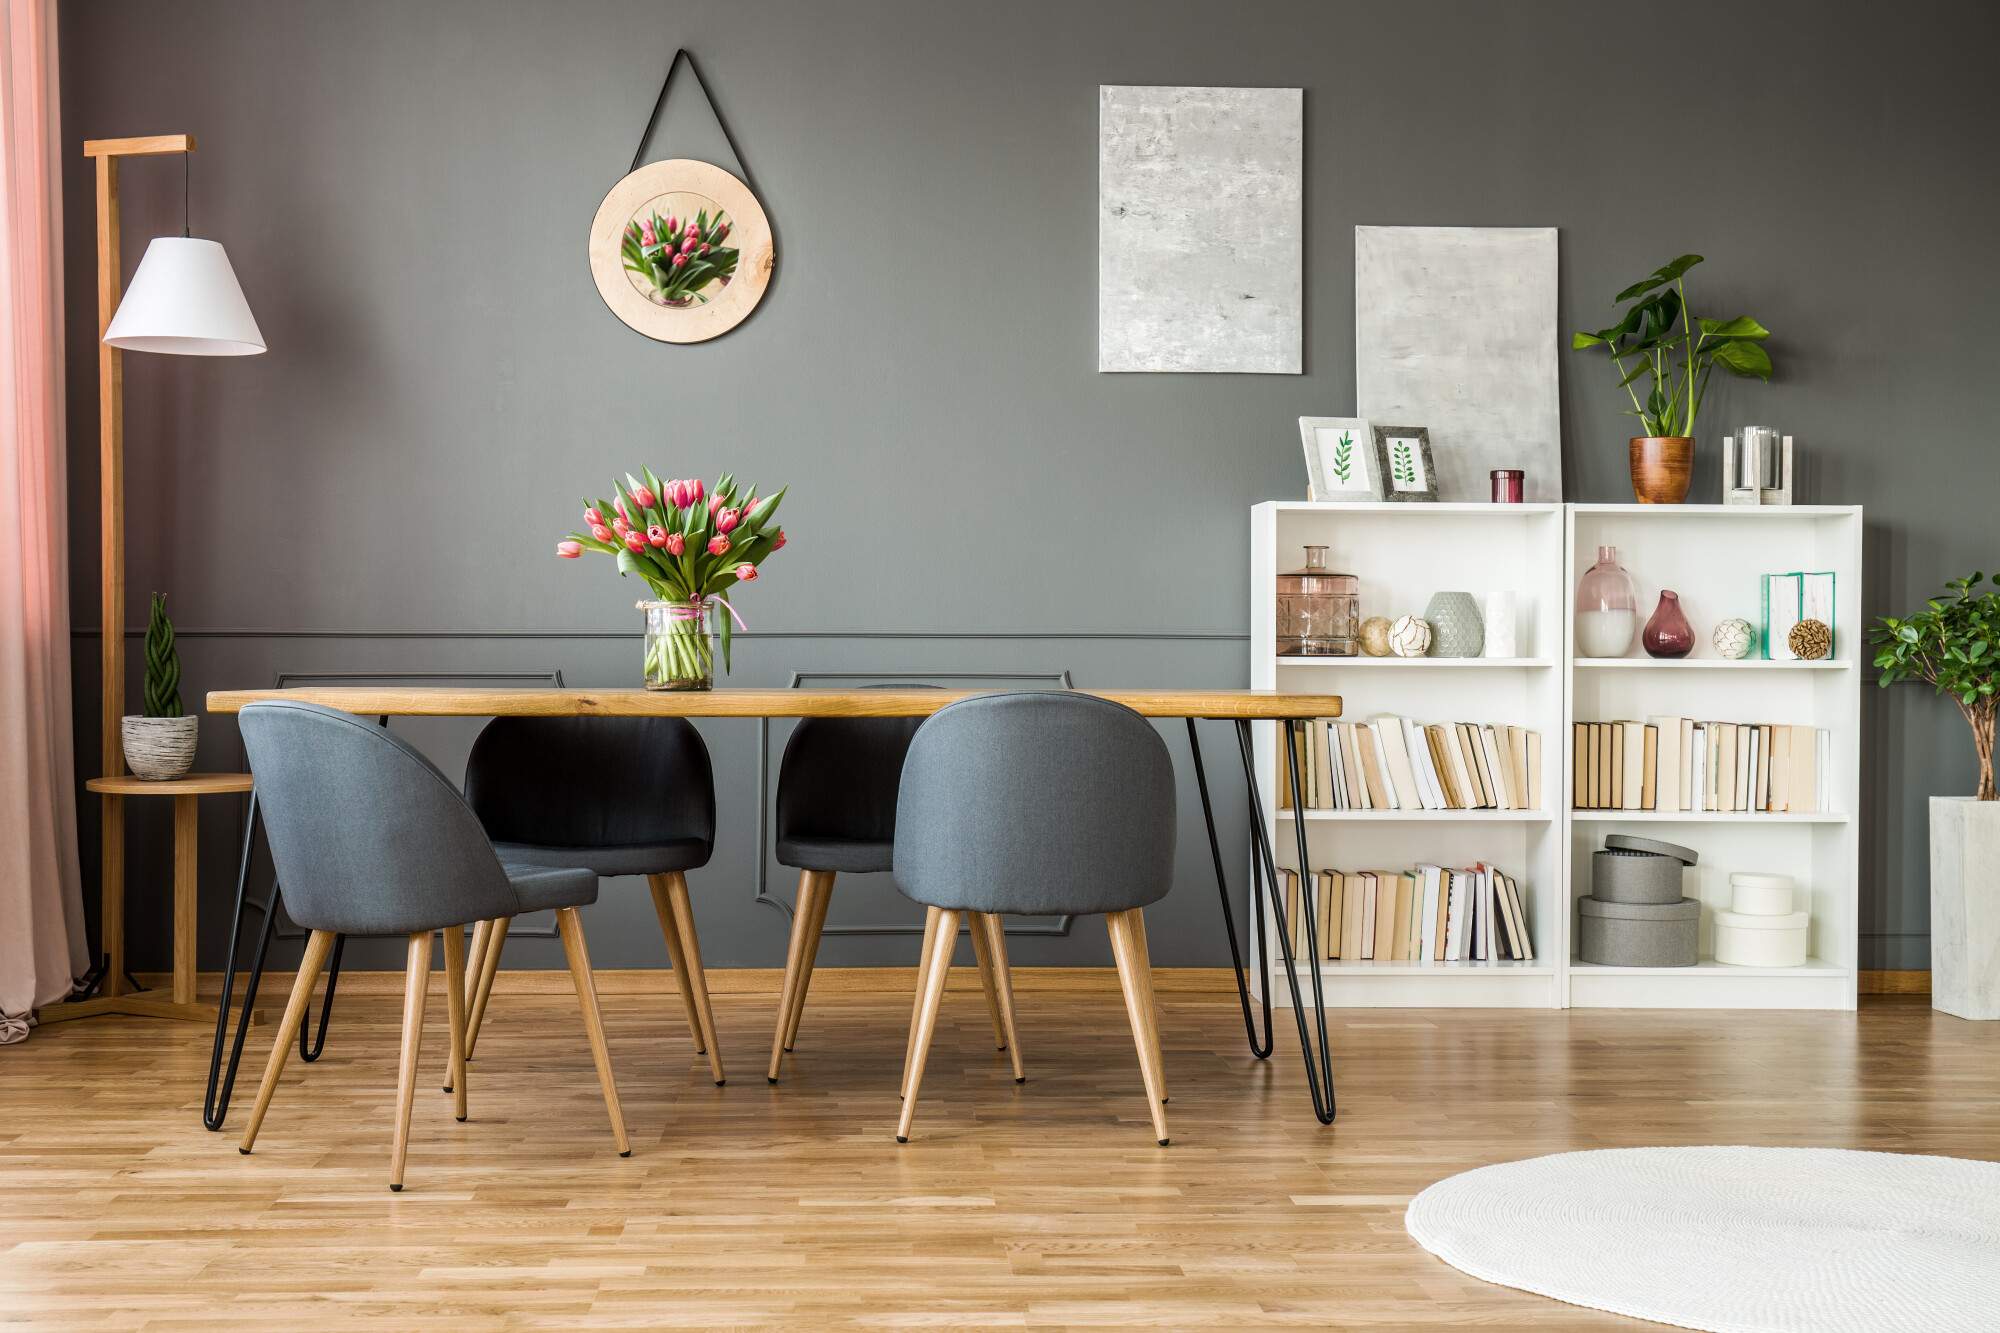 11 Mistakes with Purchasing Furniture and How to Avoid Them